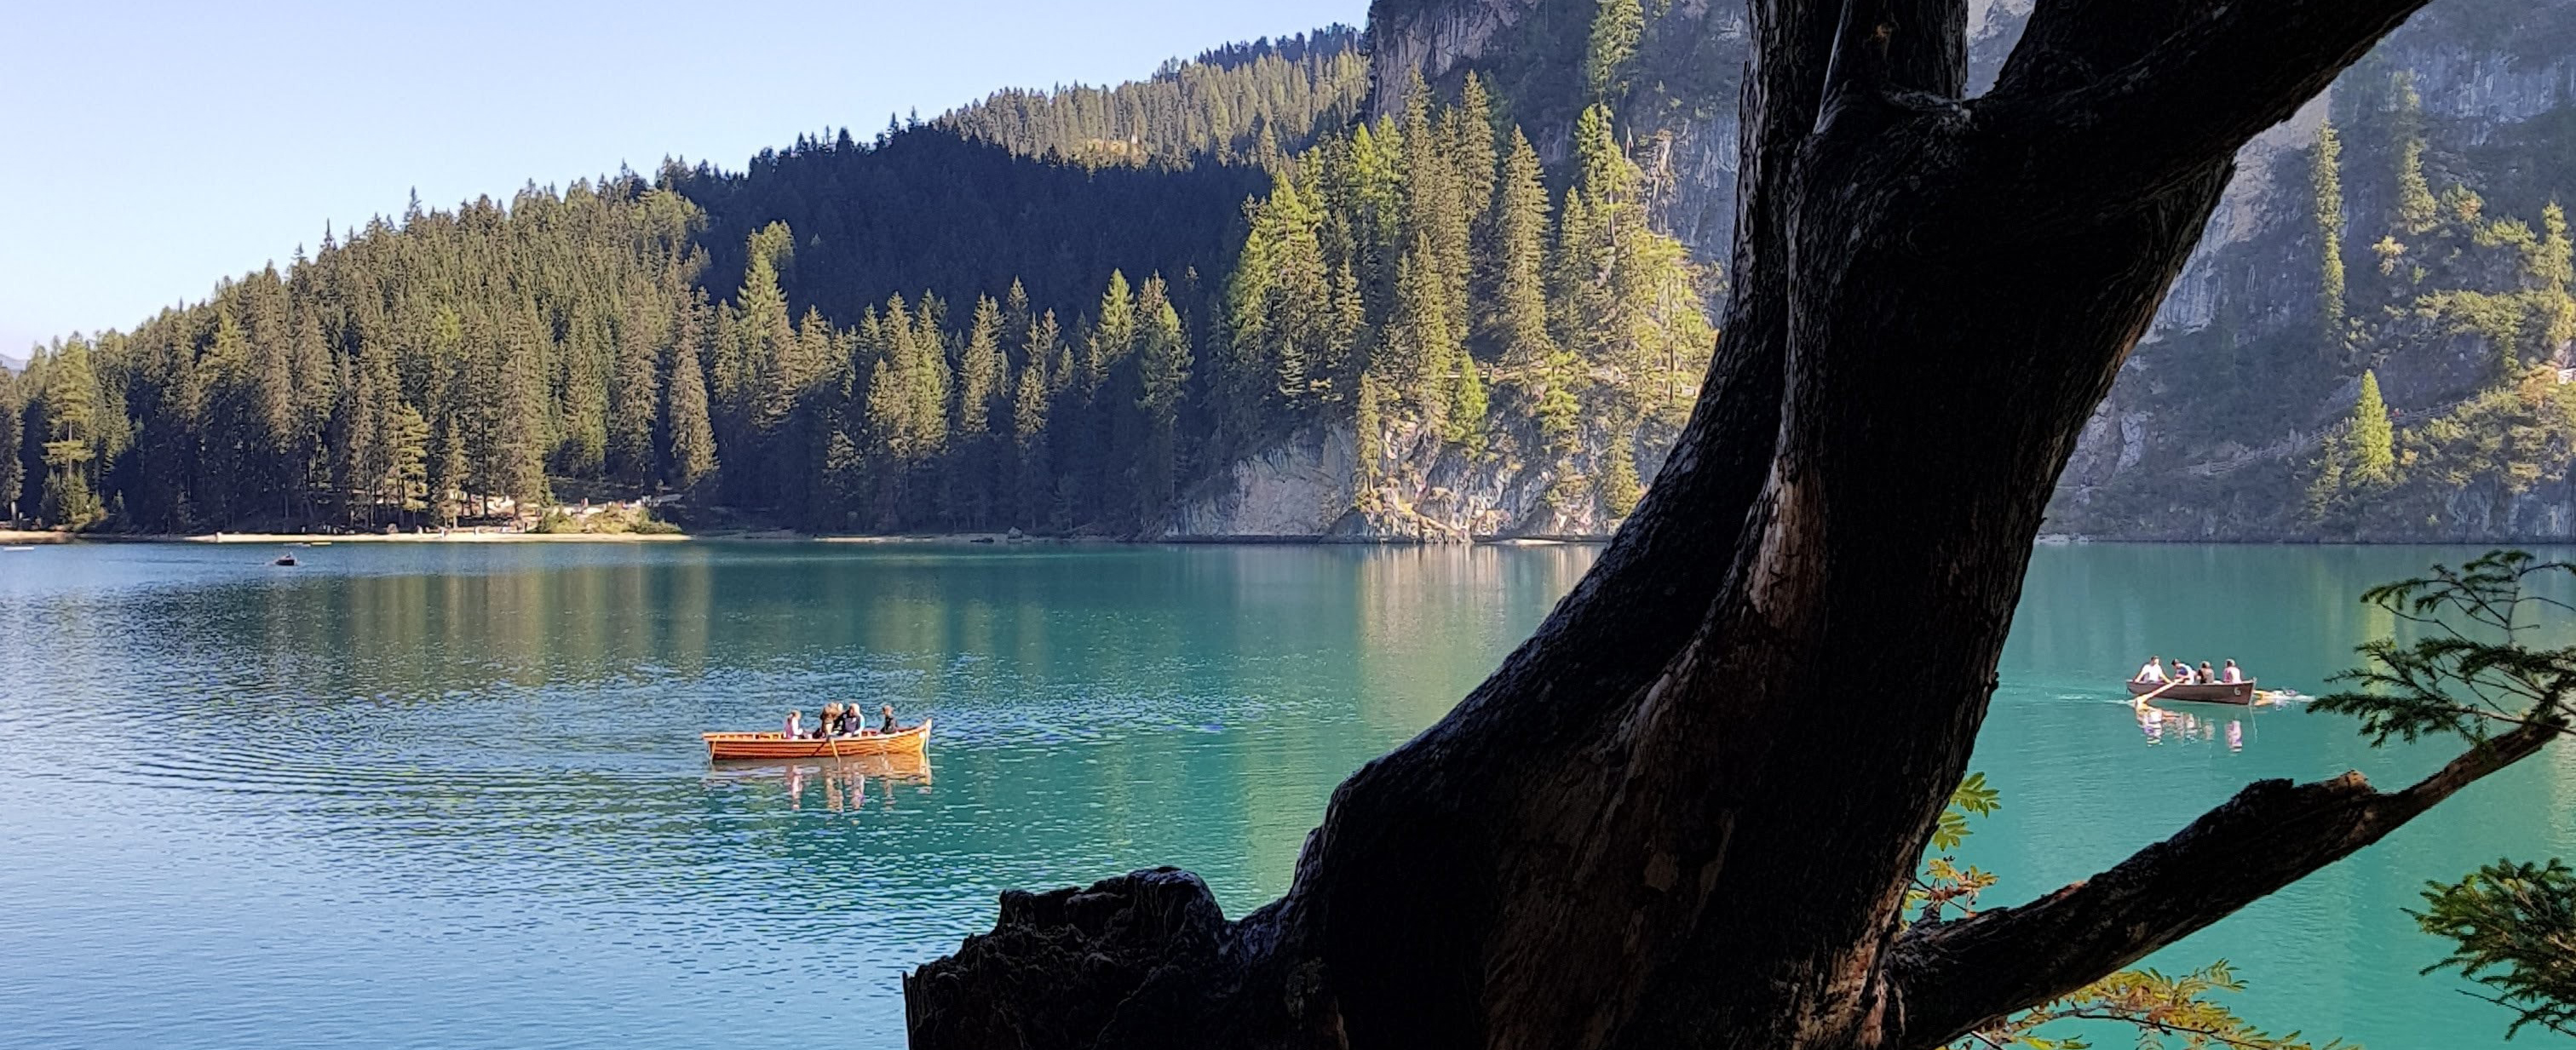 two canoes on a lake